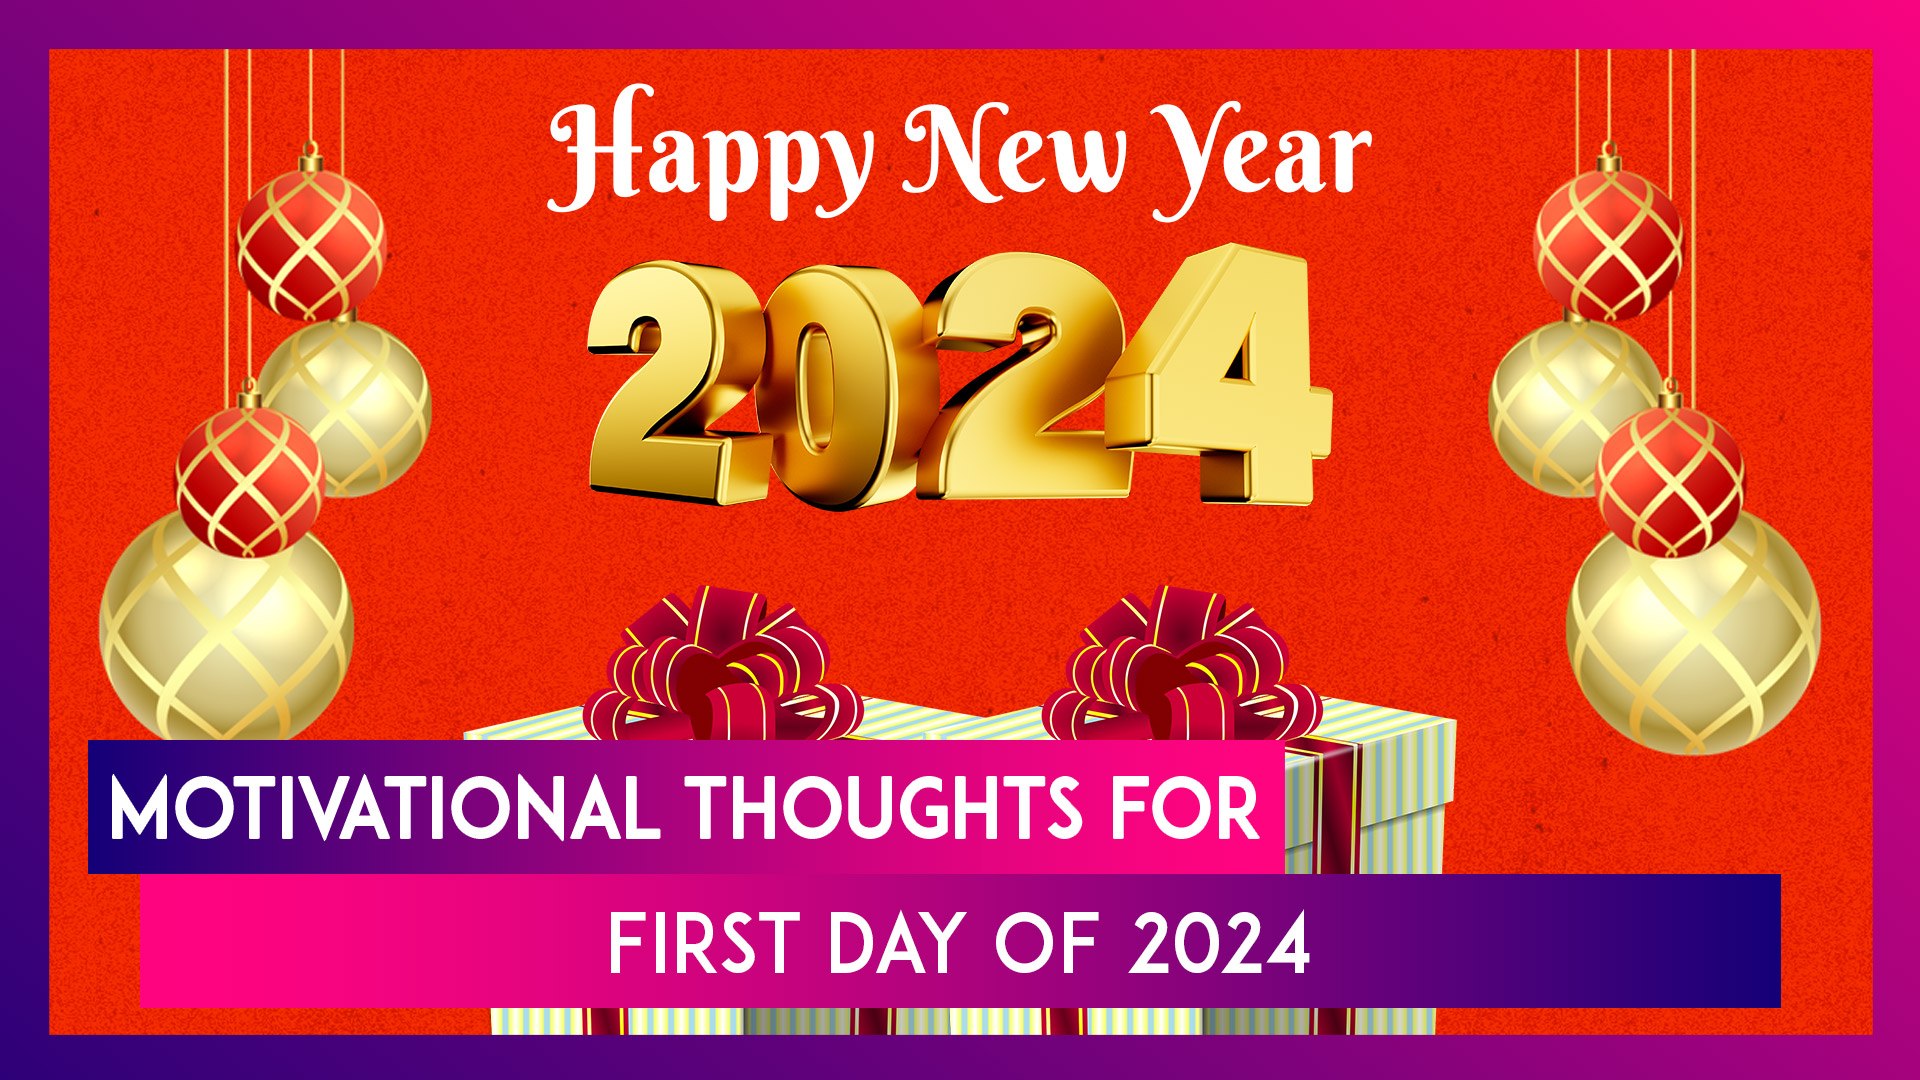 ⁣Happy New Year 2024 Greetings: Motivational Quotes And Messages To Share With Loved Ones On New Year